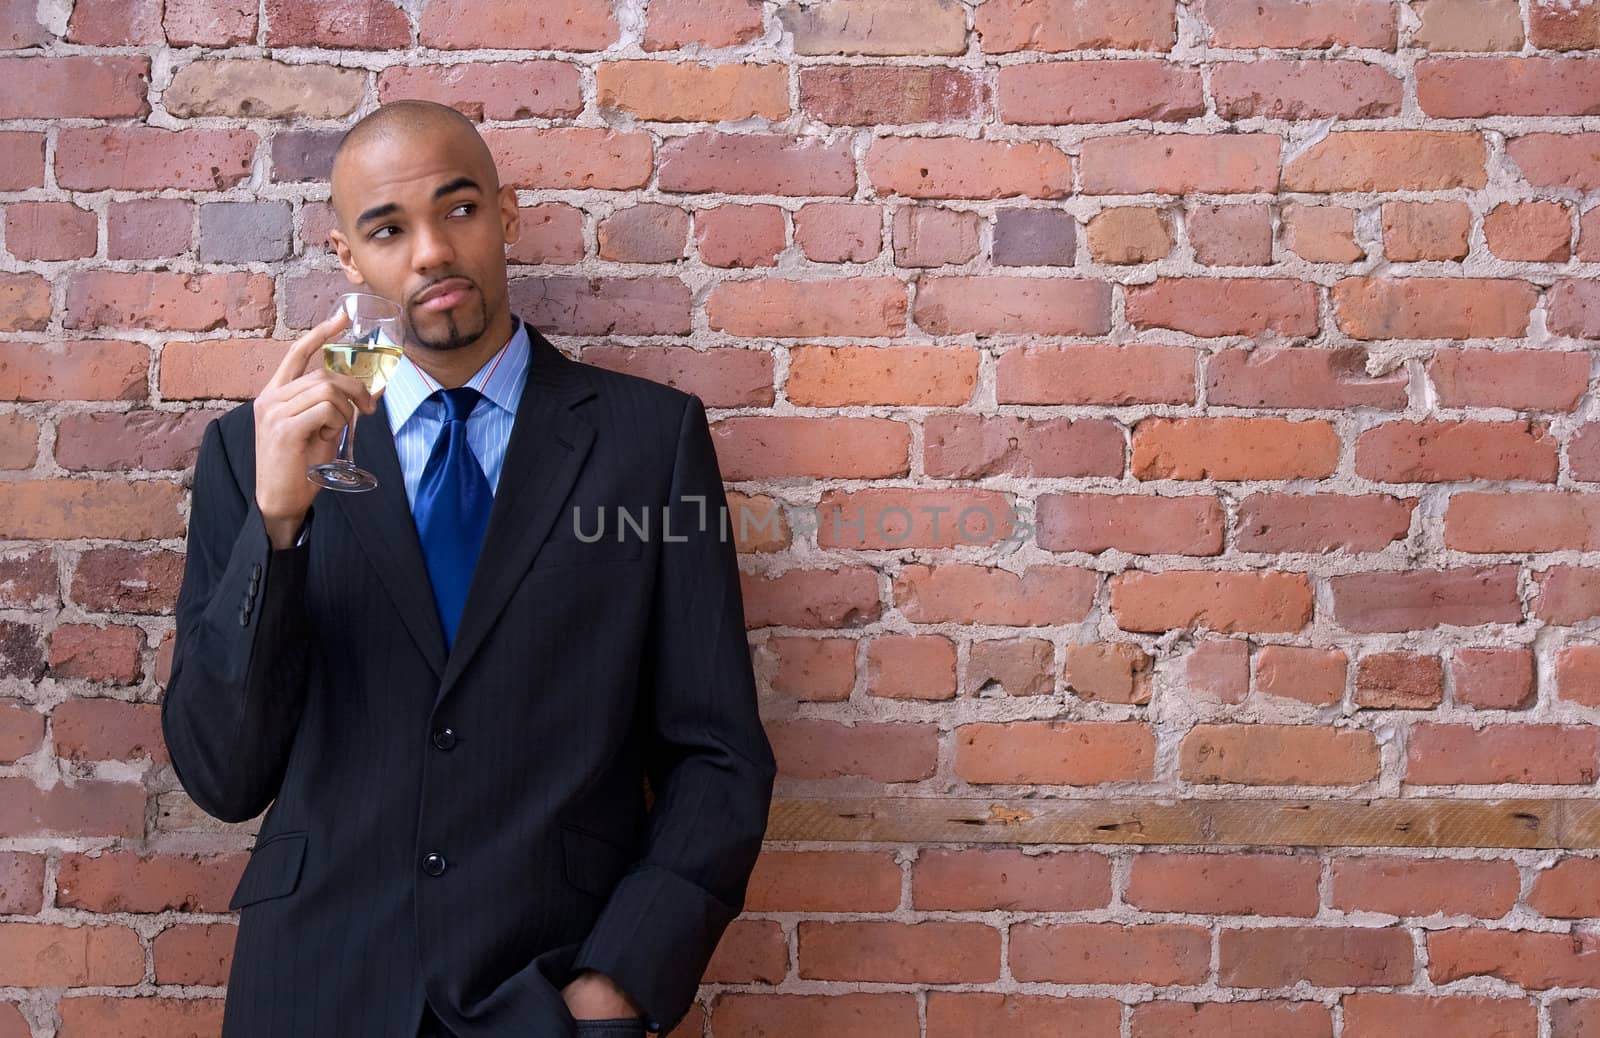 Young business man thinking and holding a glass of wine by anikasalsera